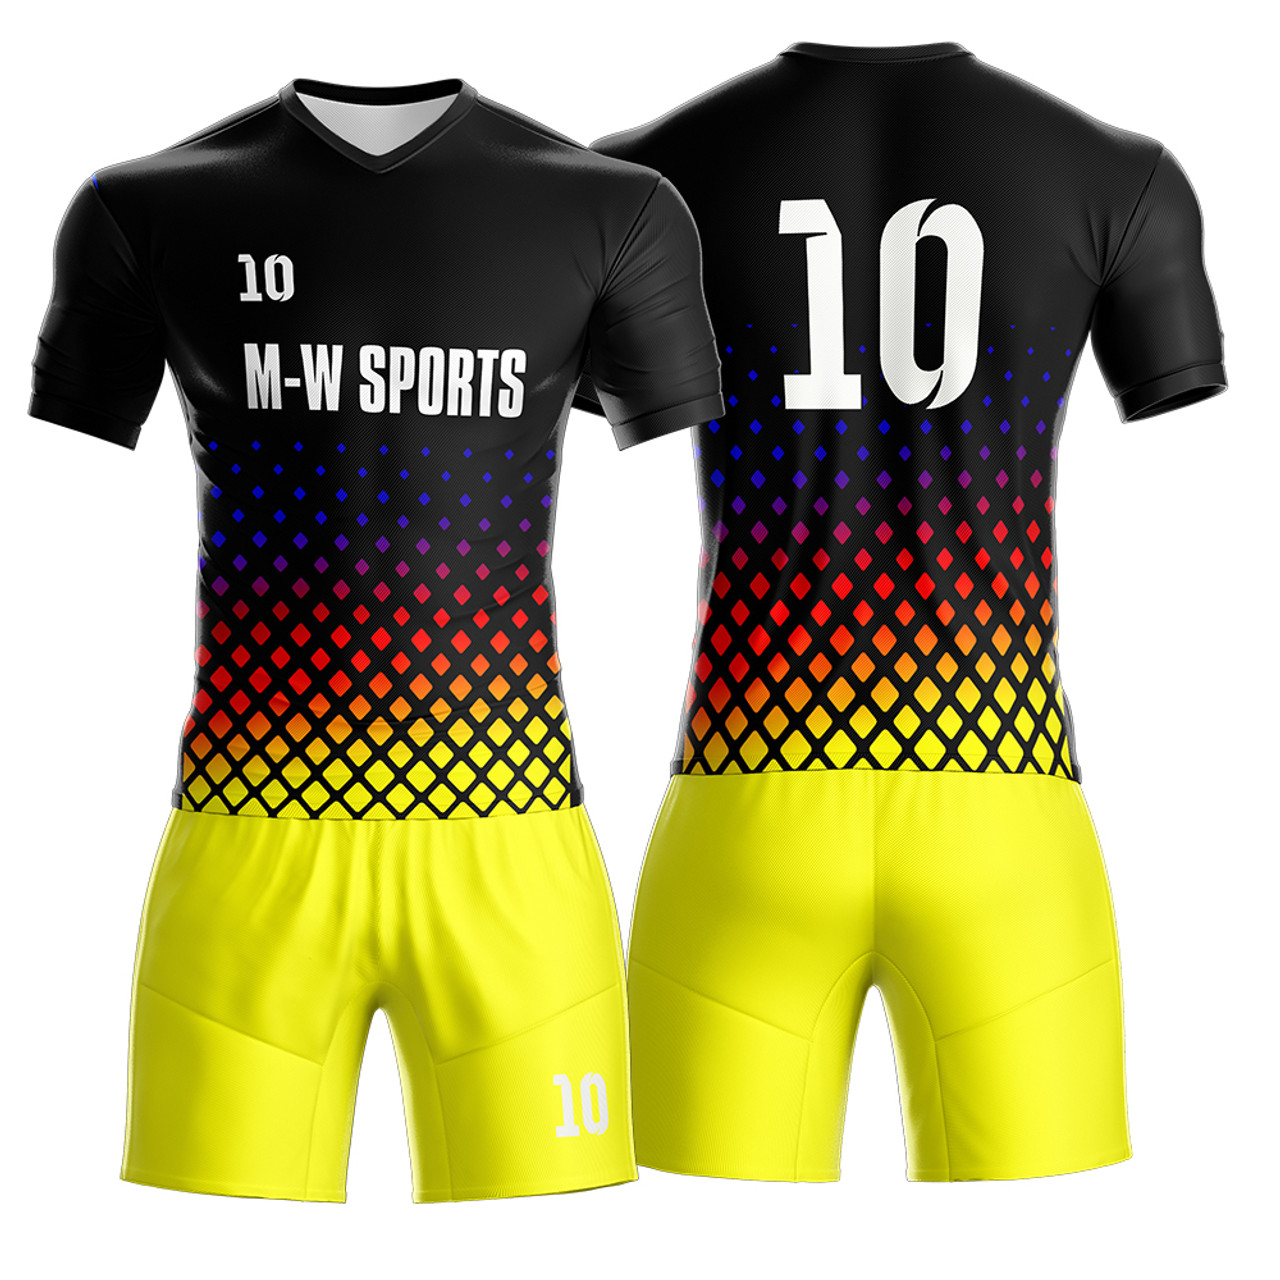 NEXT PRINT Unisex Sports Jersey Number and Name Printed Sports Professional  Jersey